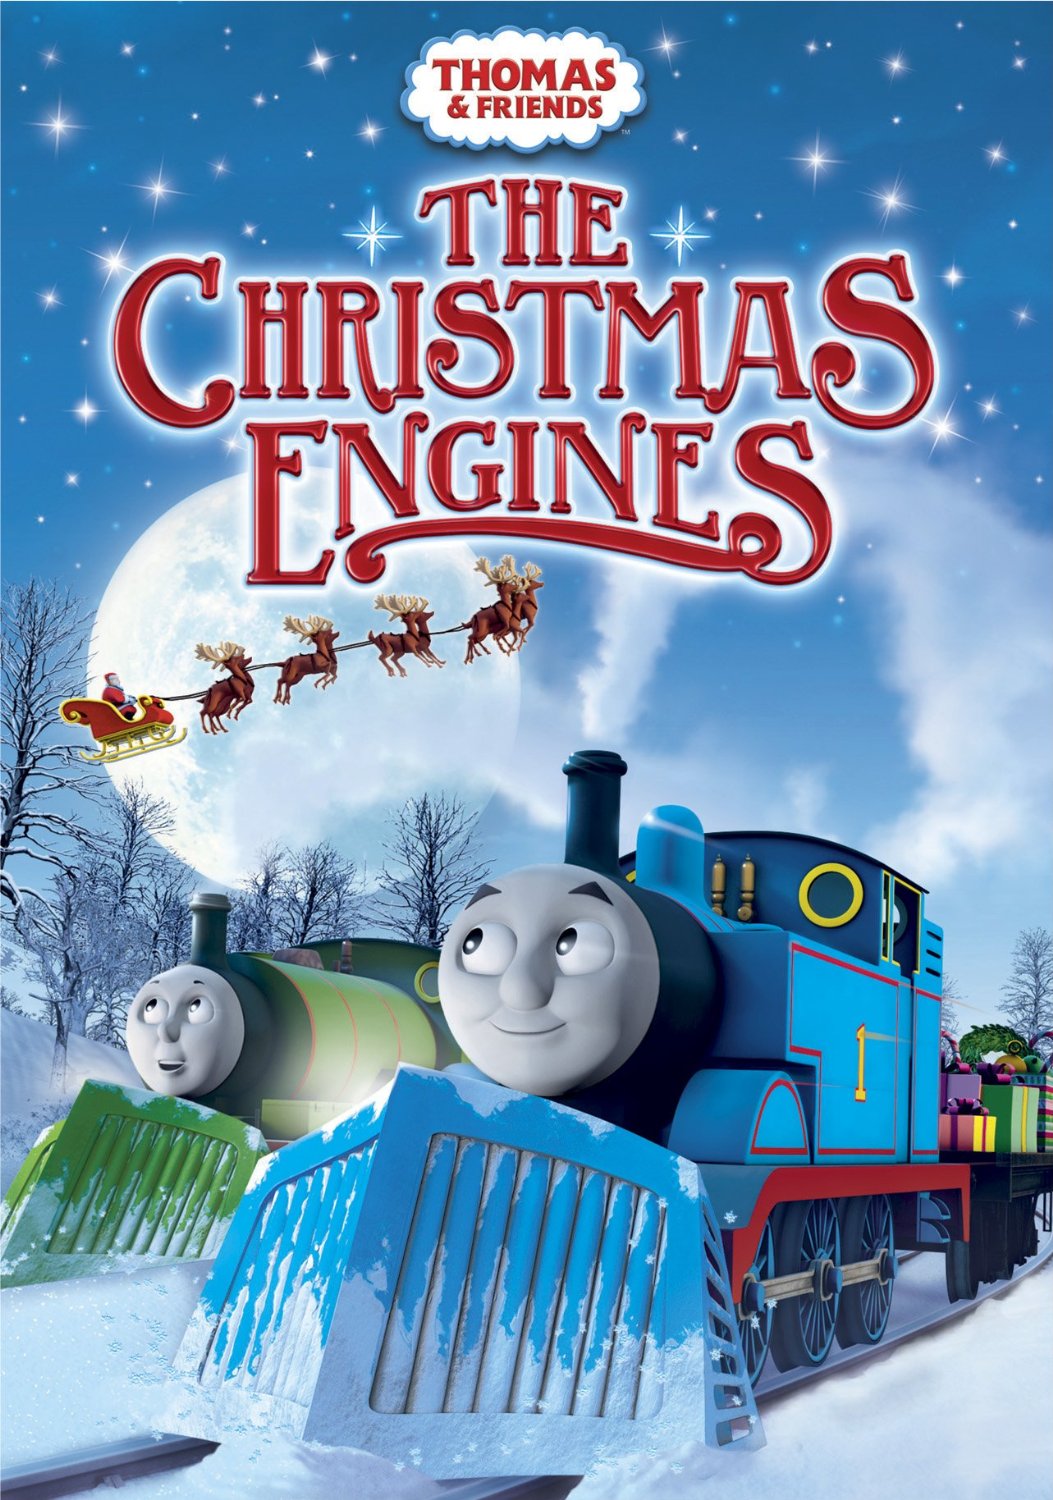 Thomas & Friends The Christmas Engines DVD